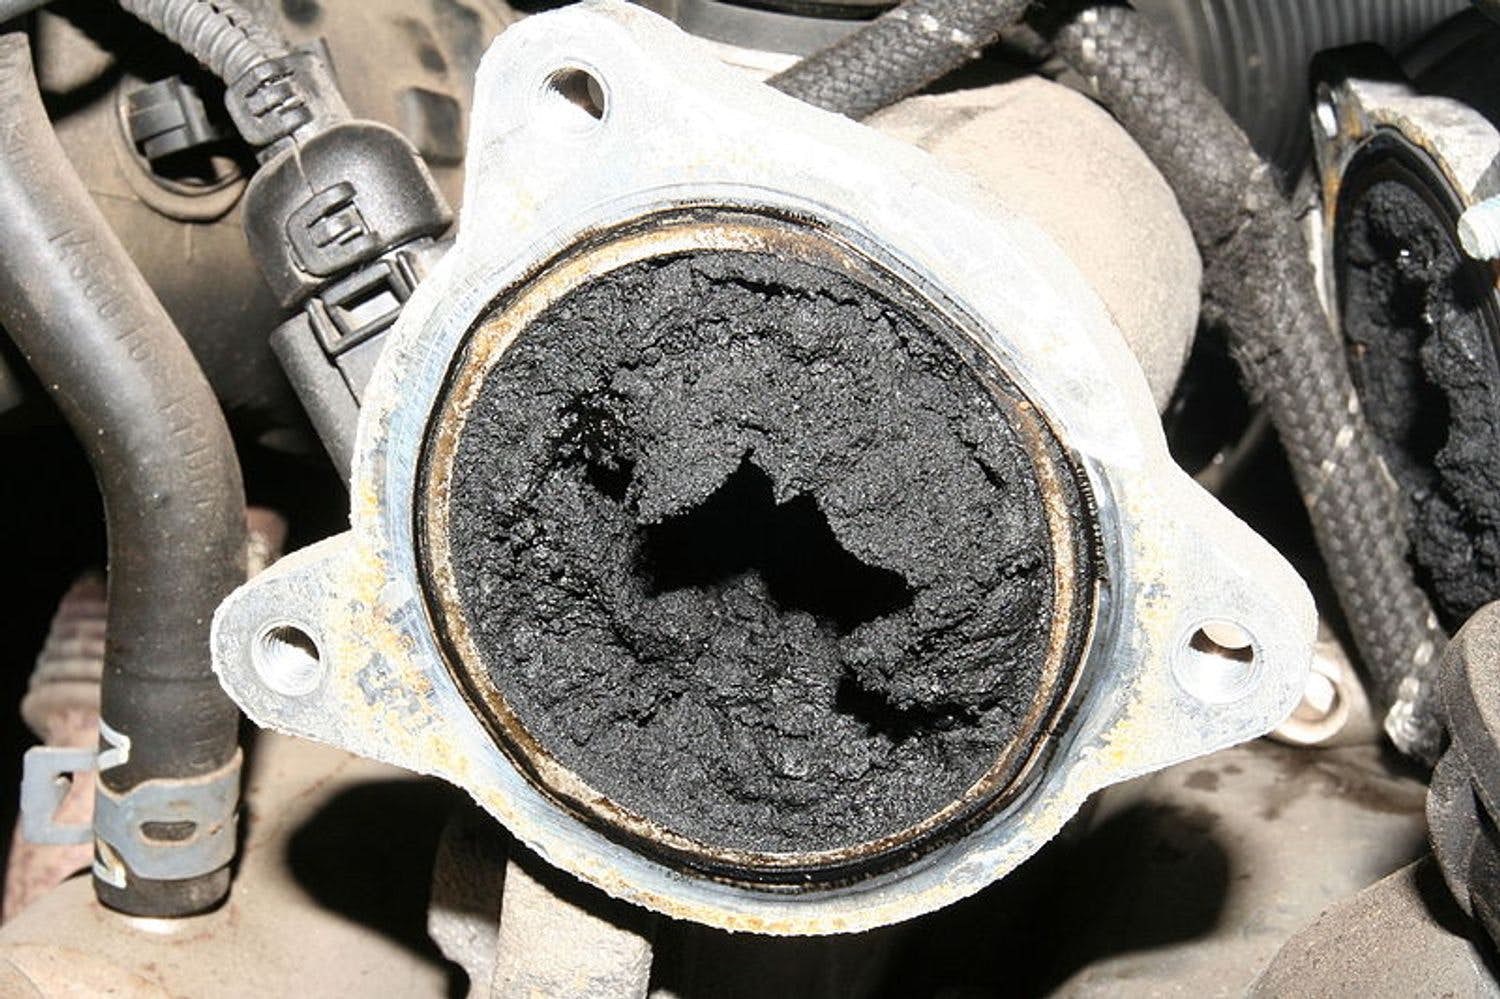 EGR valve: What happens if it doesn't work properly?